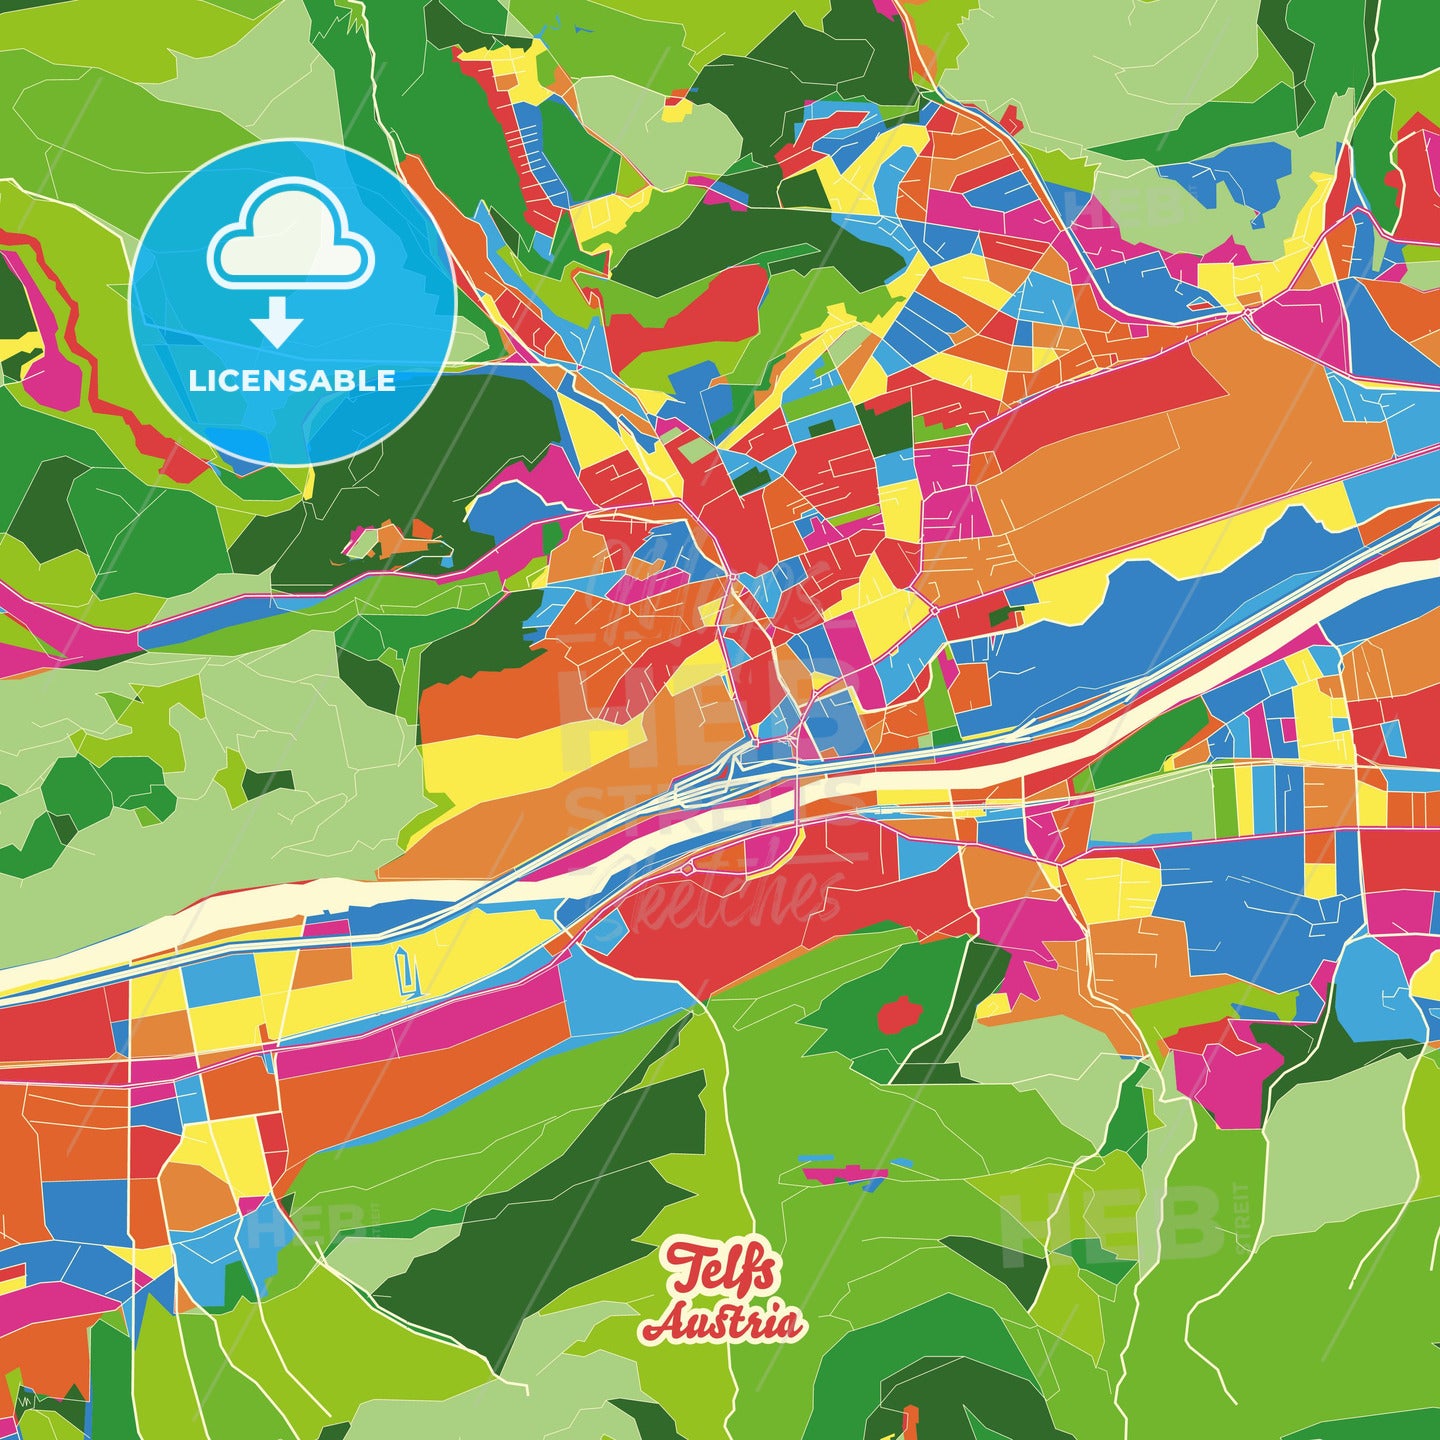 Telfs, Austria Crazy Colorful Street Map Poster Template - HEBSTREITS Sketches